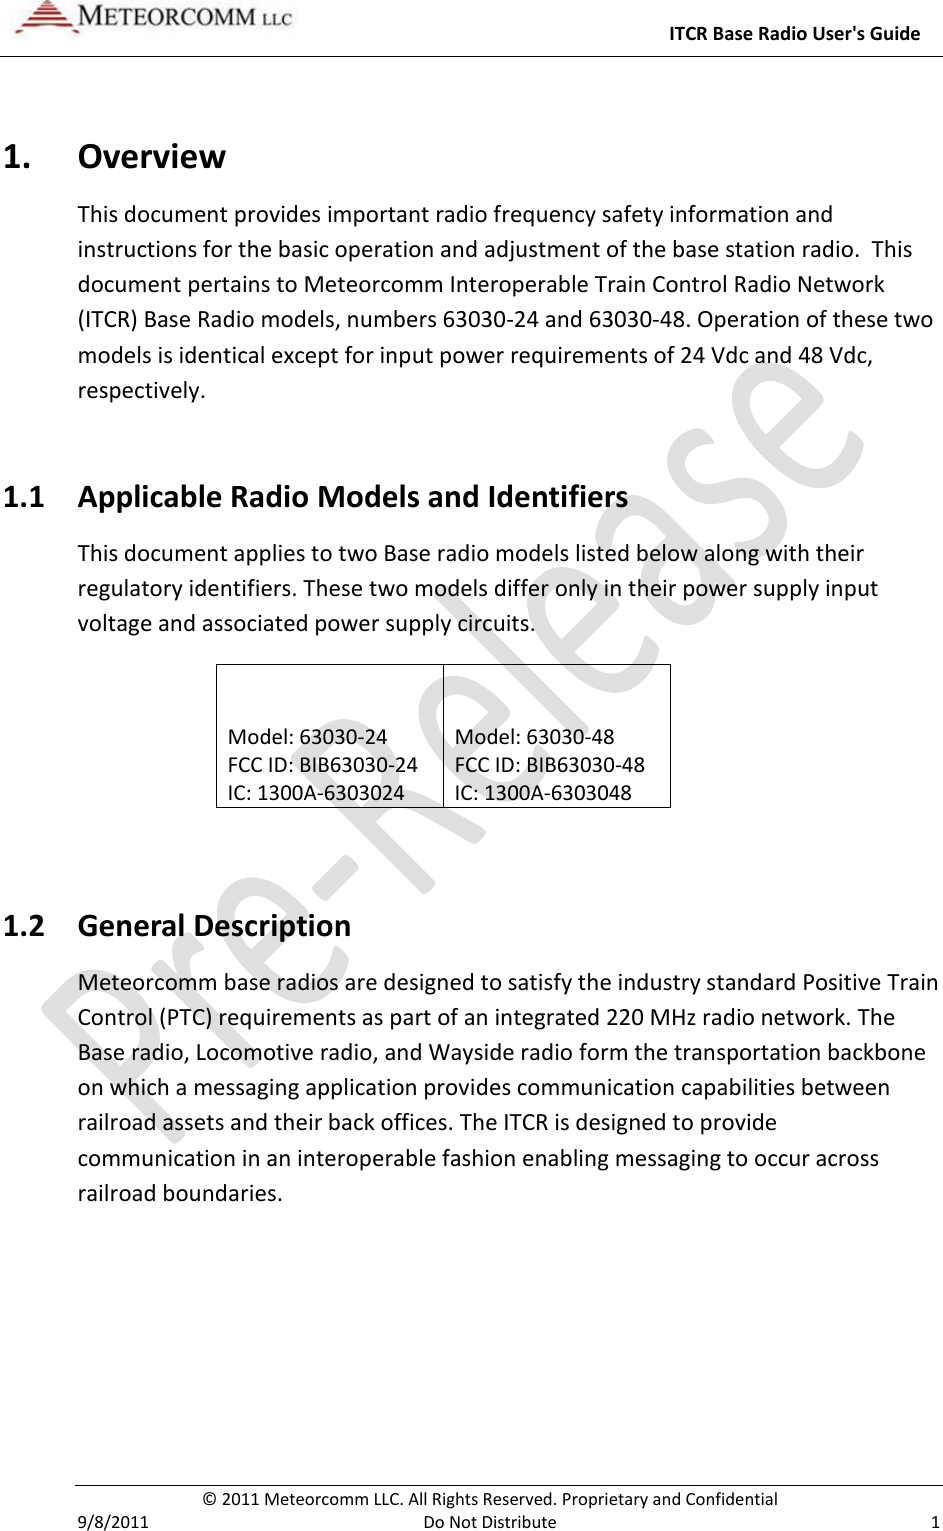     ITCR Base Radio User&apos;s Guide   © 2011 Meteorcomm LLC. All Rights Reserved. Proprietary and Confidential   9/8/2011  Do Not Distribute  1 1. Overview This document provides important radio frequency safety information and instructions for the basic operation and adjustment of the base station radio.  This document pertains to Meteorcomm Interoperable Train Control Radio Network (ITCR) Base Radio models, numbers 63030-24 and 63030-48. Operation of these two models is identical except for input power requirements of 24 Vdc and 48 Vdc, respectively.  1.1 Applicable Radio Models and Identifiers This document applies to two Base radio models listed below along with their regulatory identifiers. These two models differ only in their power supply input voltage and associated power supply circuits. Model: 63030-24       FCC ID: BIB63030-24           IC: 1300A-6303024 1.1.1 Model: 63030-48       FCC ID: BIB63030-48      IC: 1300A-6303048  1.2 General Description Meteorcomm base radios are designed to satisfy the industry standard Positive Train Control (PTC) requirements as part of an integrated 220 MHz radio network. The Base radio, Locomotive radio, and Wayside radio form the transportation backbone on which a messaging application provides communication capabilities between railroad assets and their back offices. The ITCR is designed to provide communication in an interoperable fashion enabling messaging to occur across railroad boundaries.  